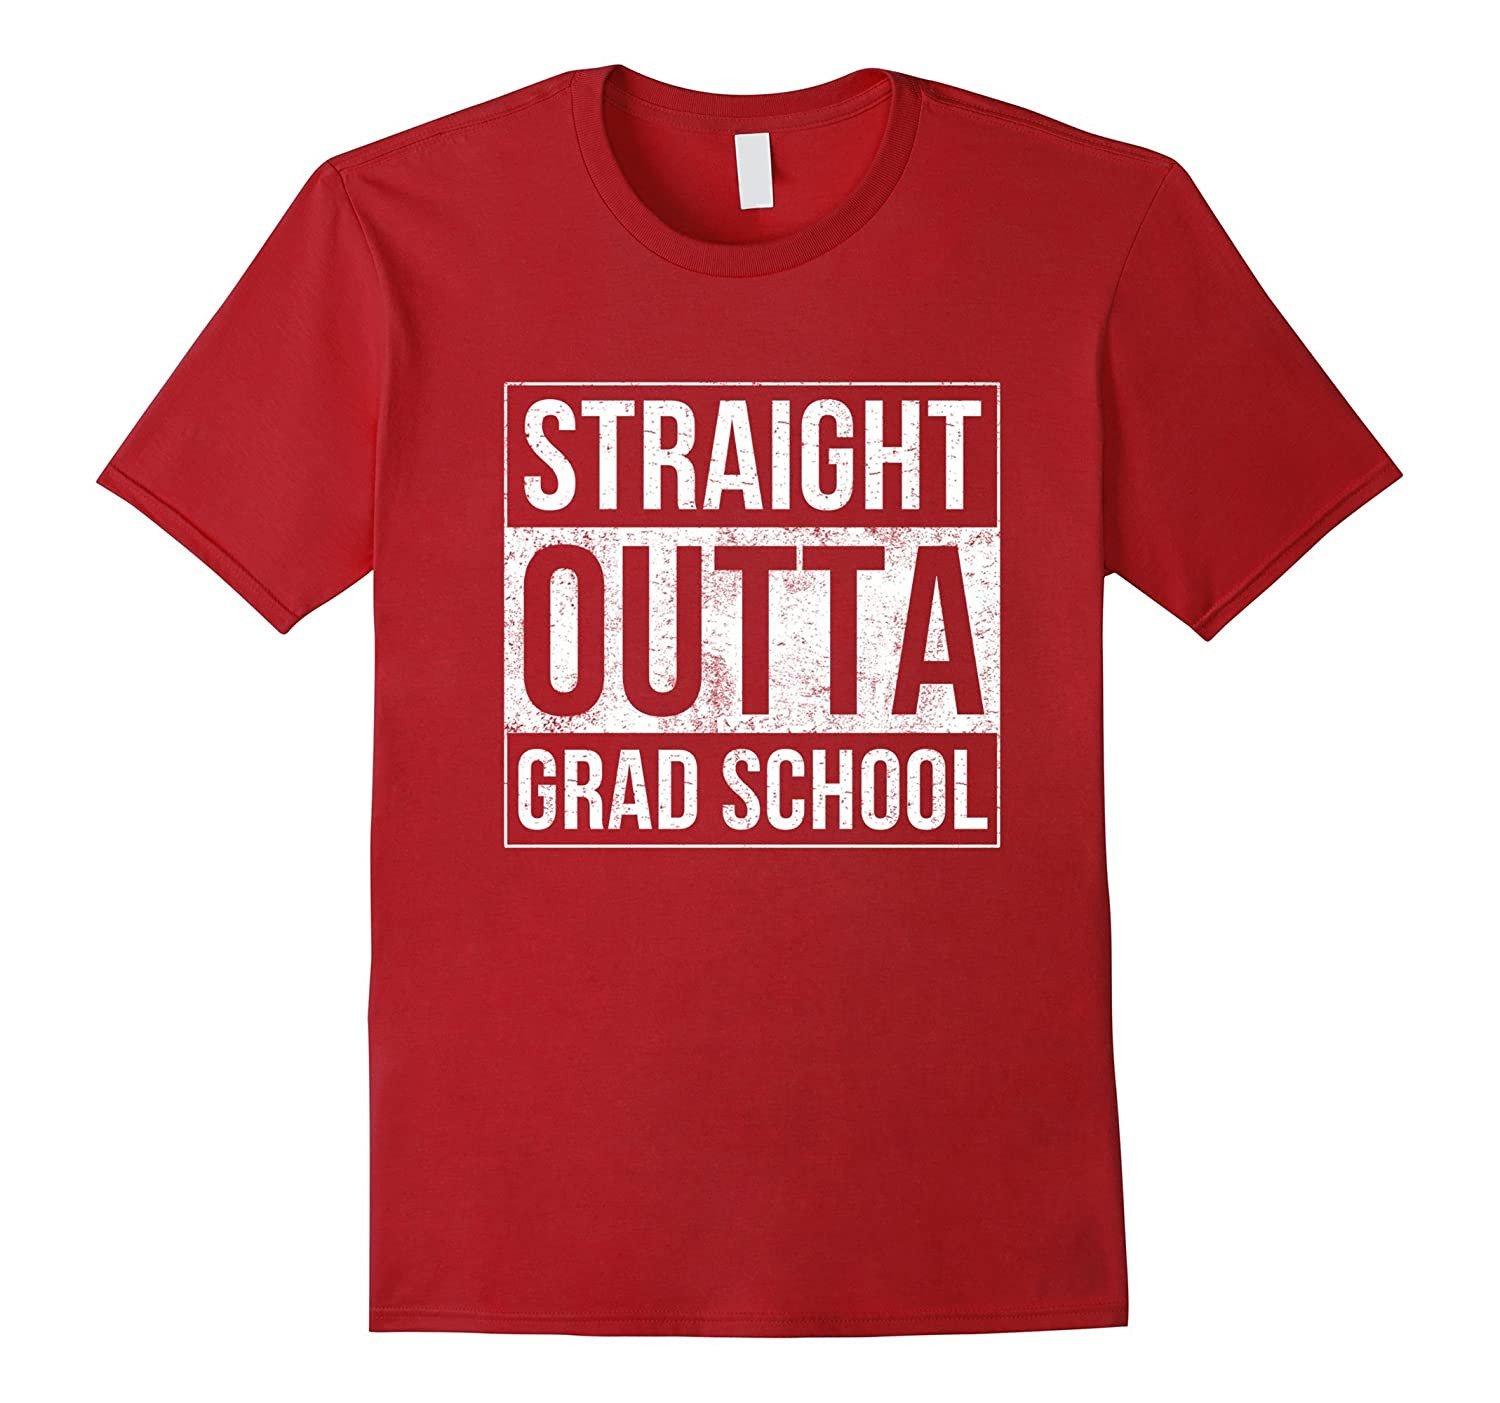 Graduation Gift Ideas For Doctorate Degree
 Funny Grad School Graduation Gift Masters Degree Doctorate